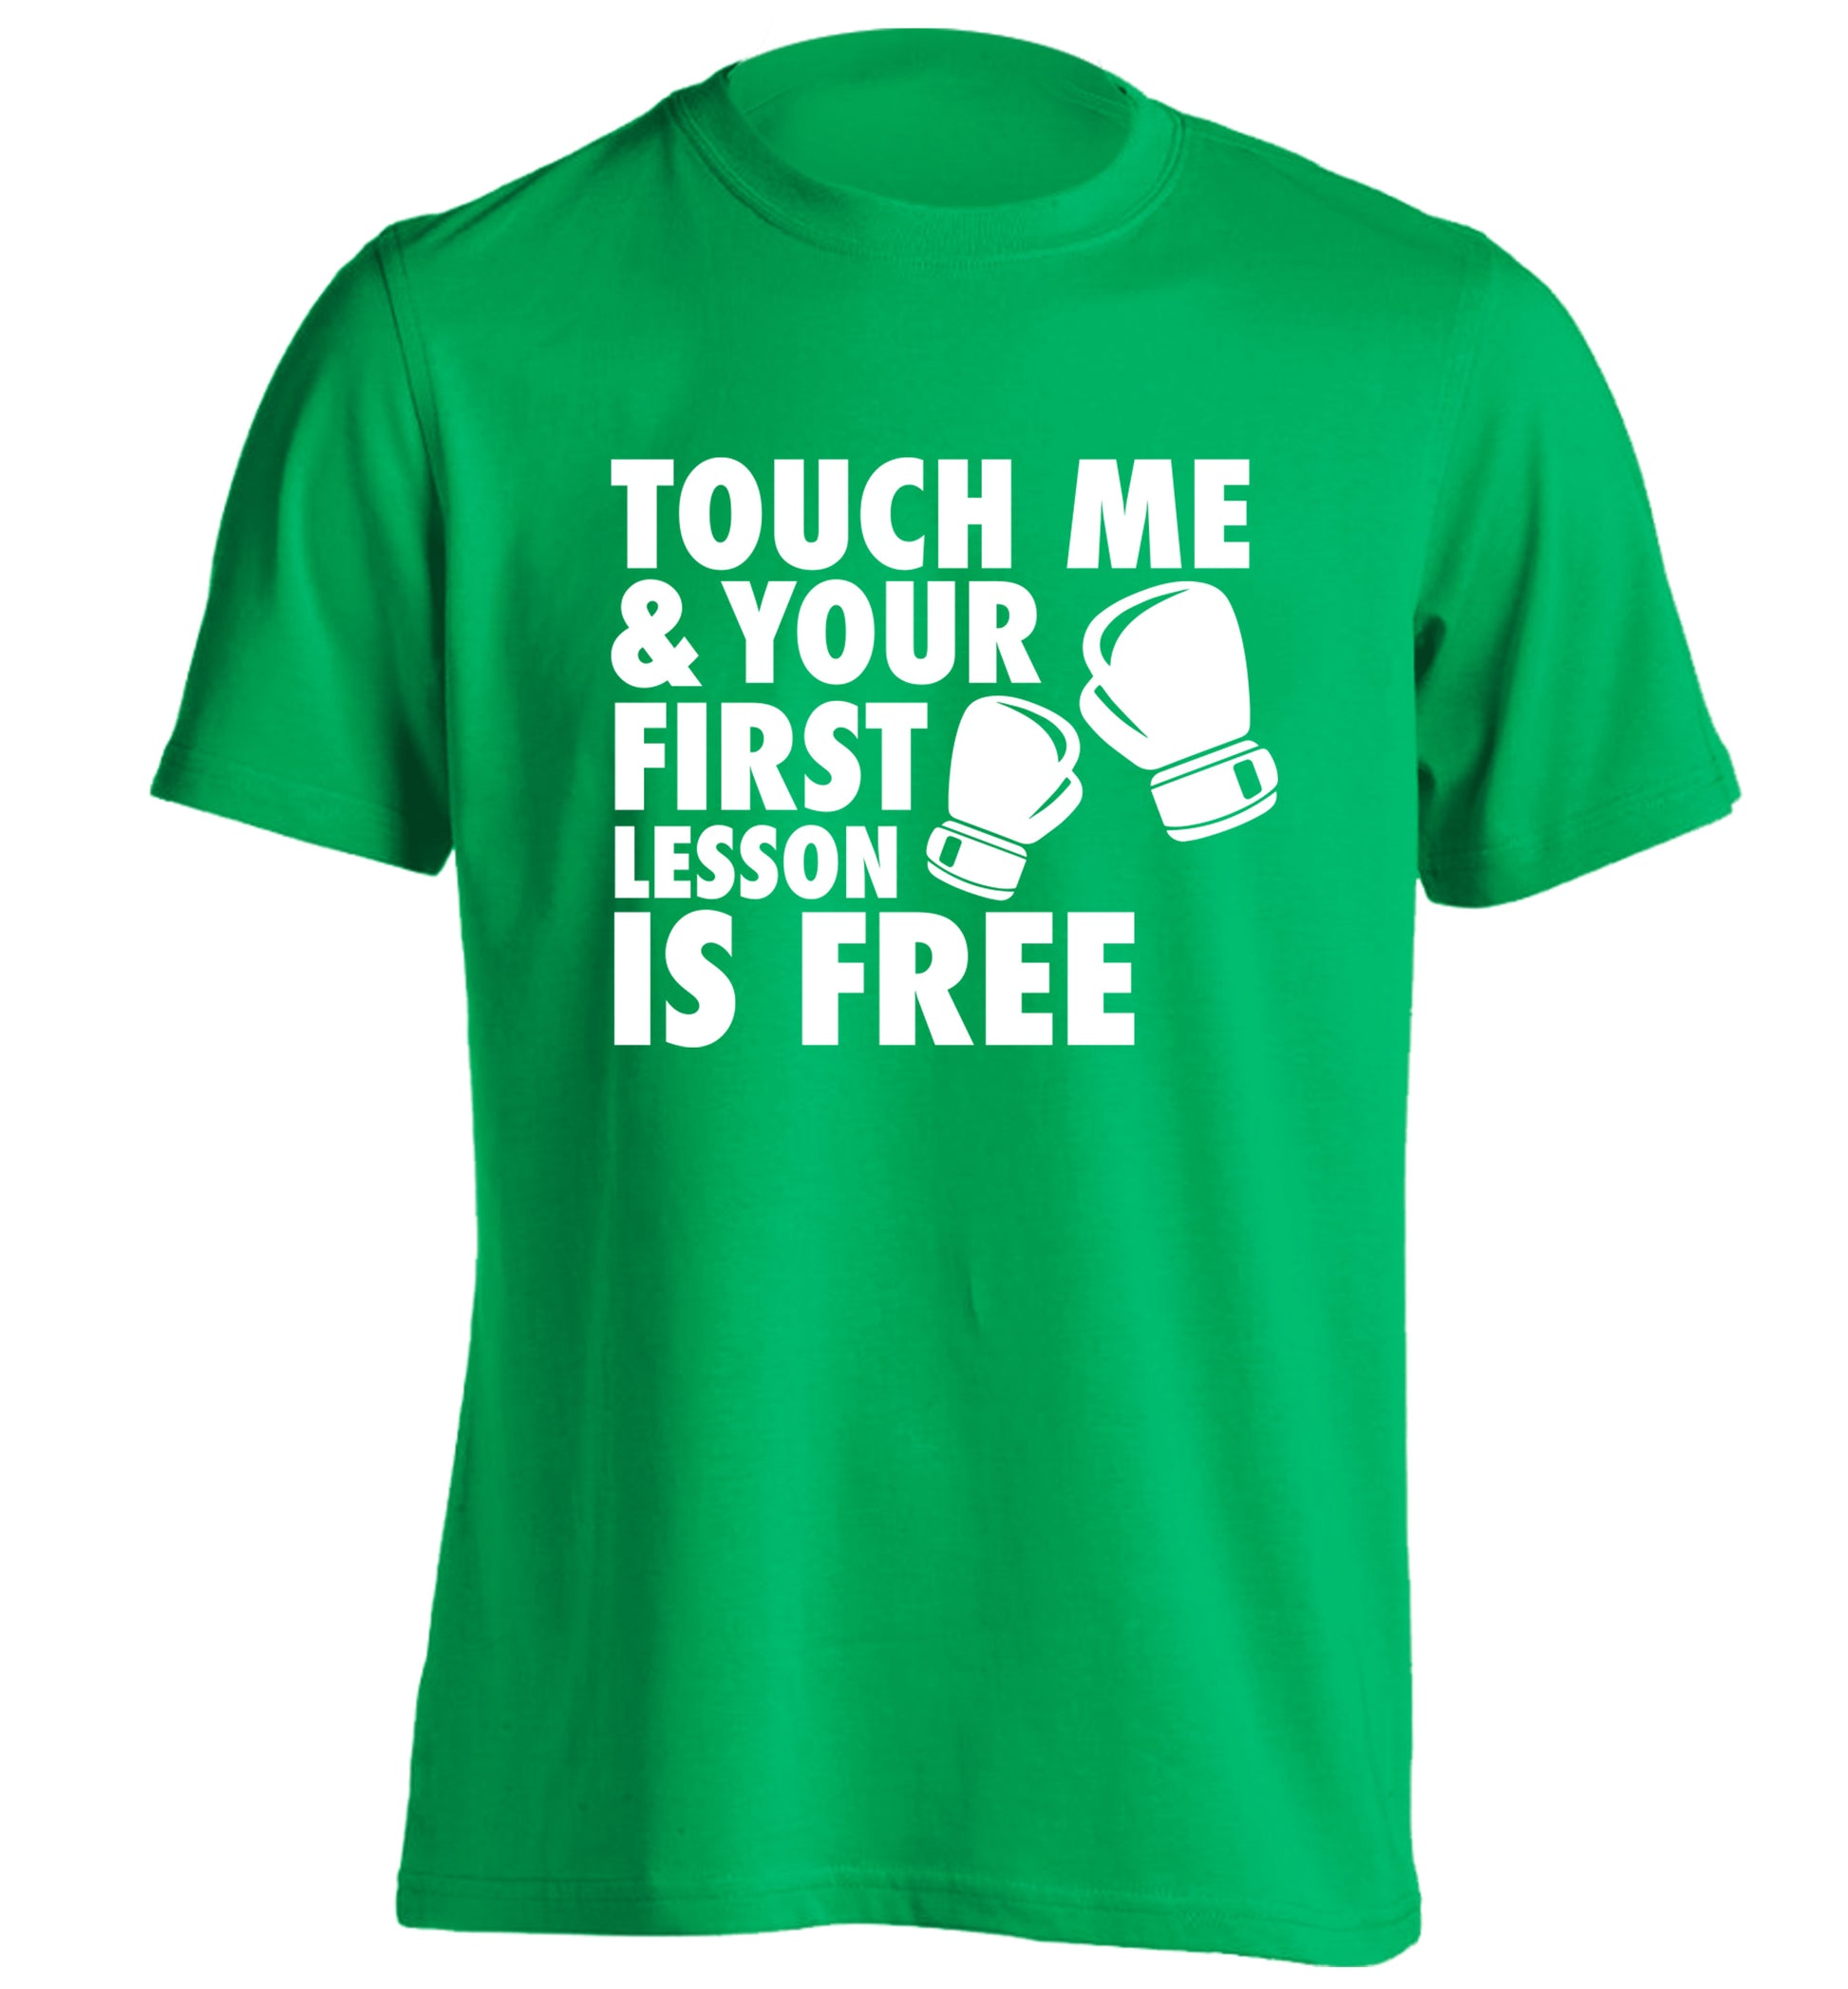 Touch me and your First Lesson is Free  adults unisex green Tshirt 2XL